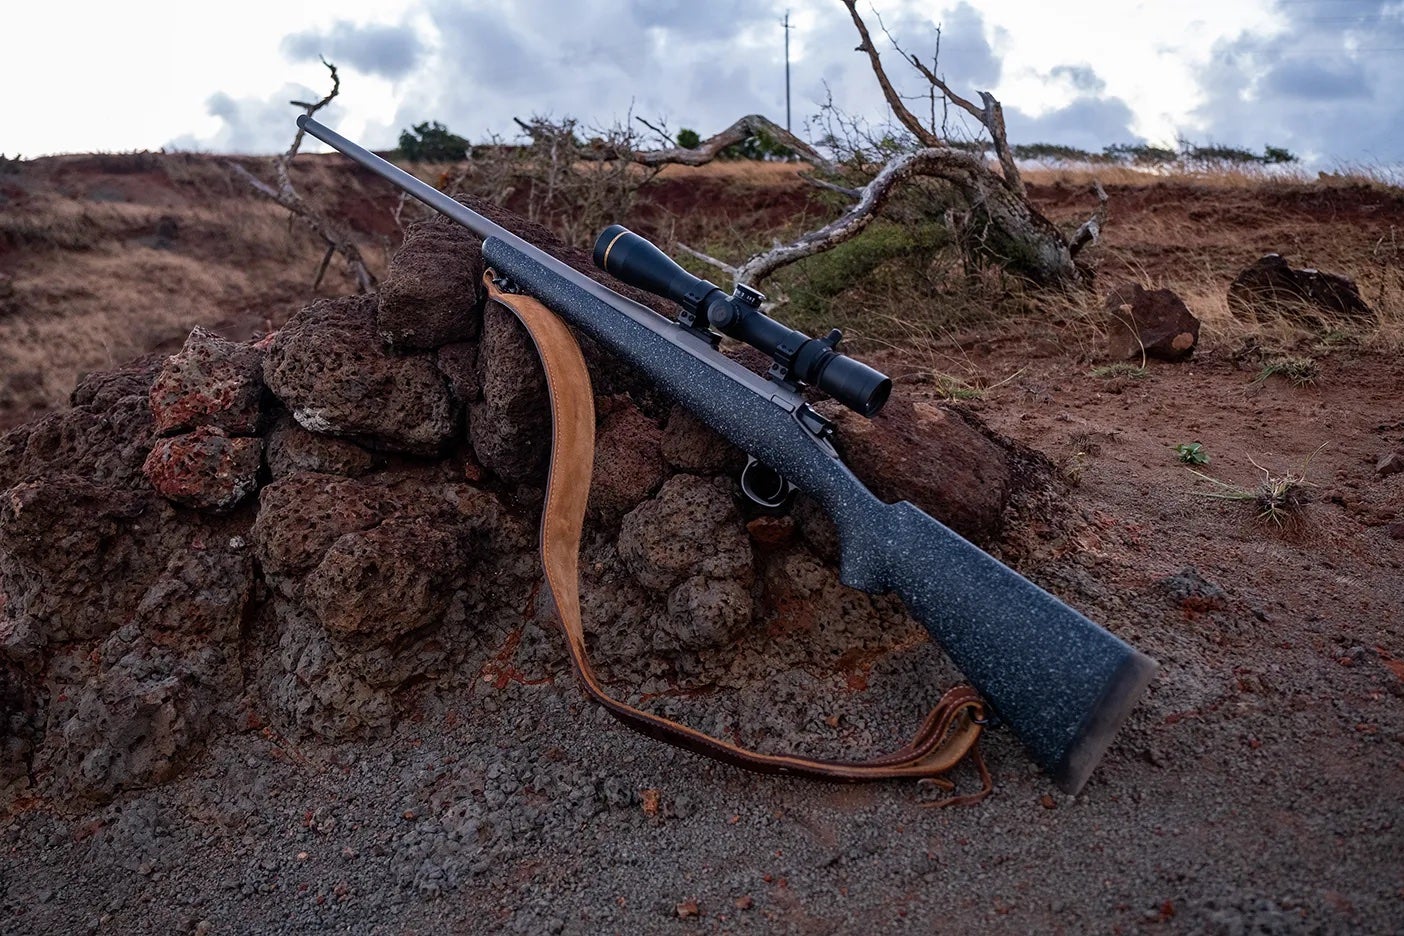 The Nosler 21 is a great rifle for in the field and at the range.